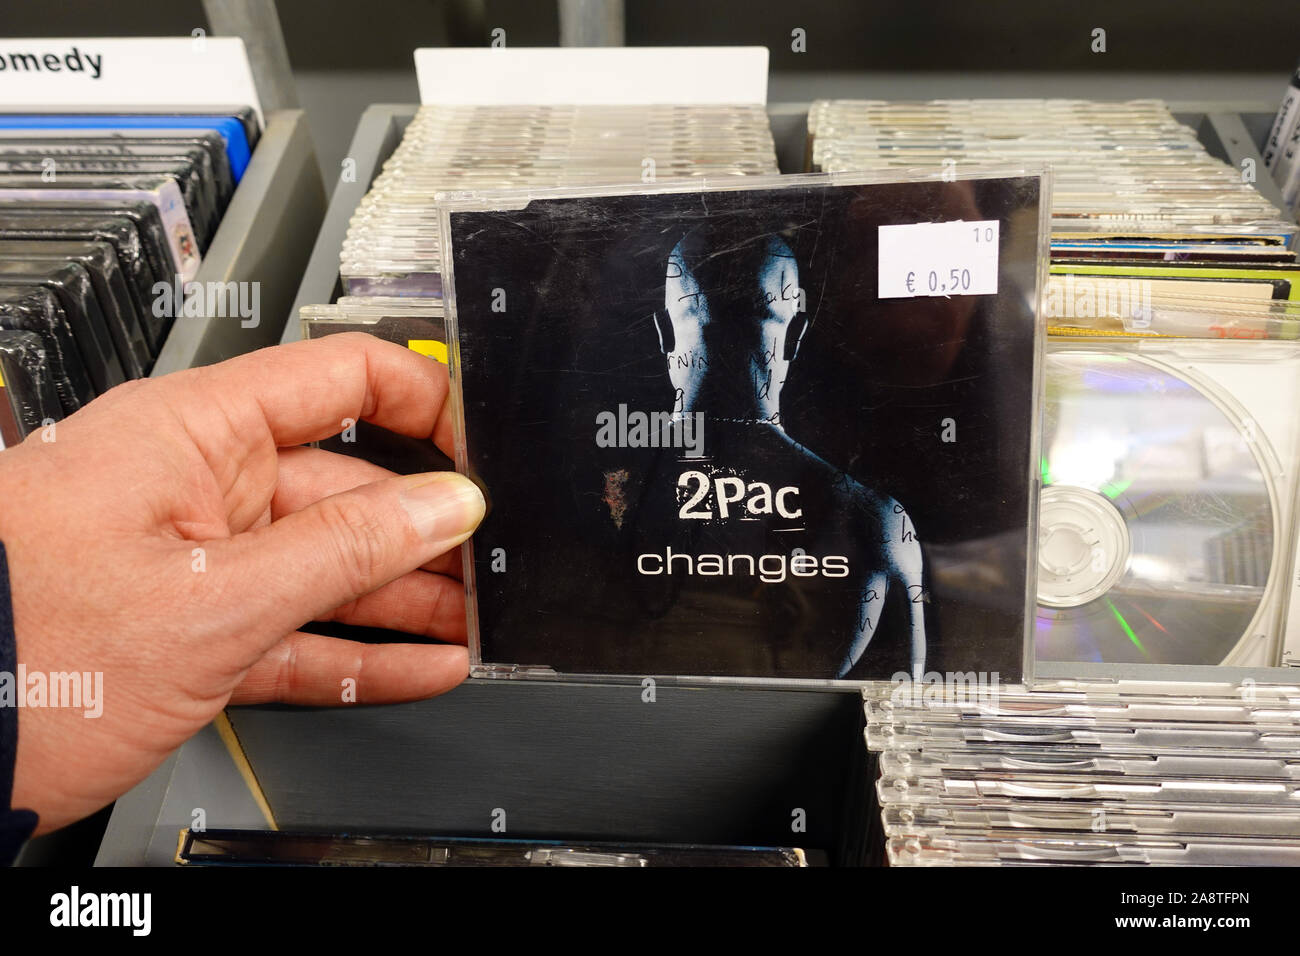 CD single: 2pac - changes Stock Photo